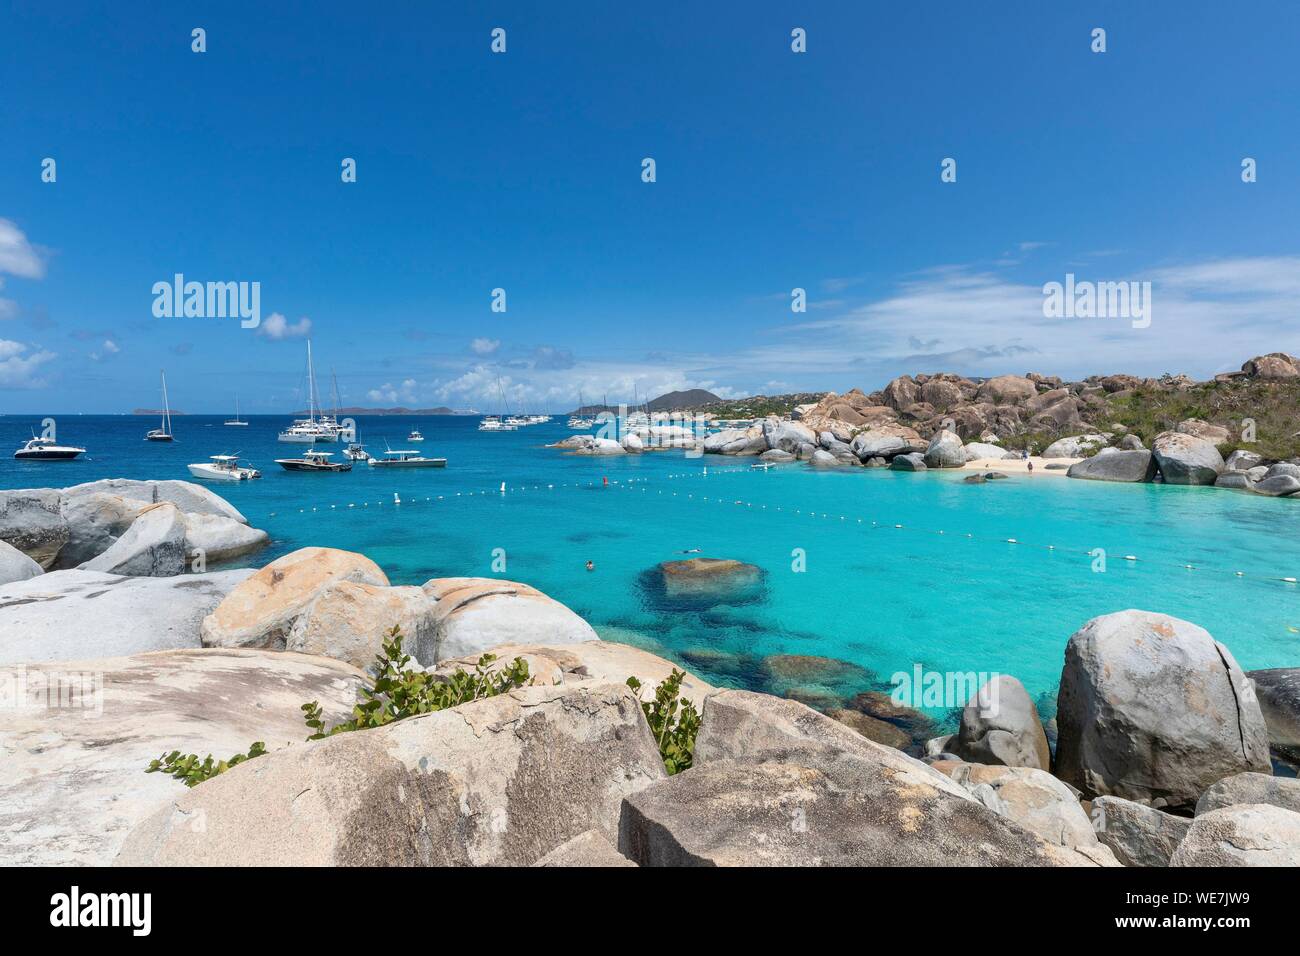 West Indies, British Virgin Islands, Virgin Gorda Island, The Baths, bathing beach view, sailboats at anchor, in the foreground the typical rocks that surround the paradisiacal swimming area Stock Photo